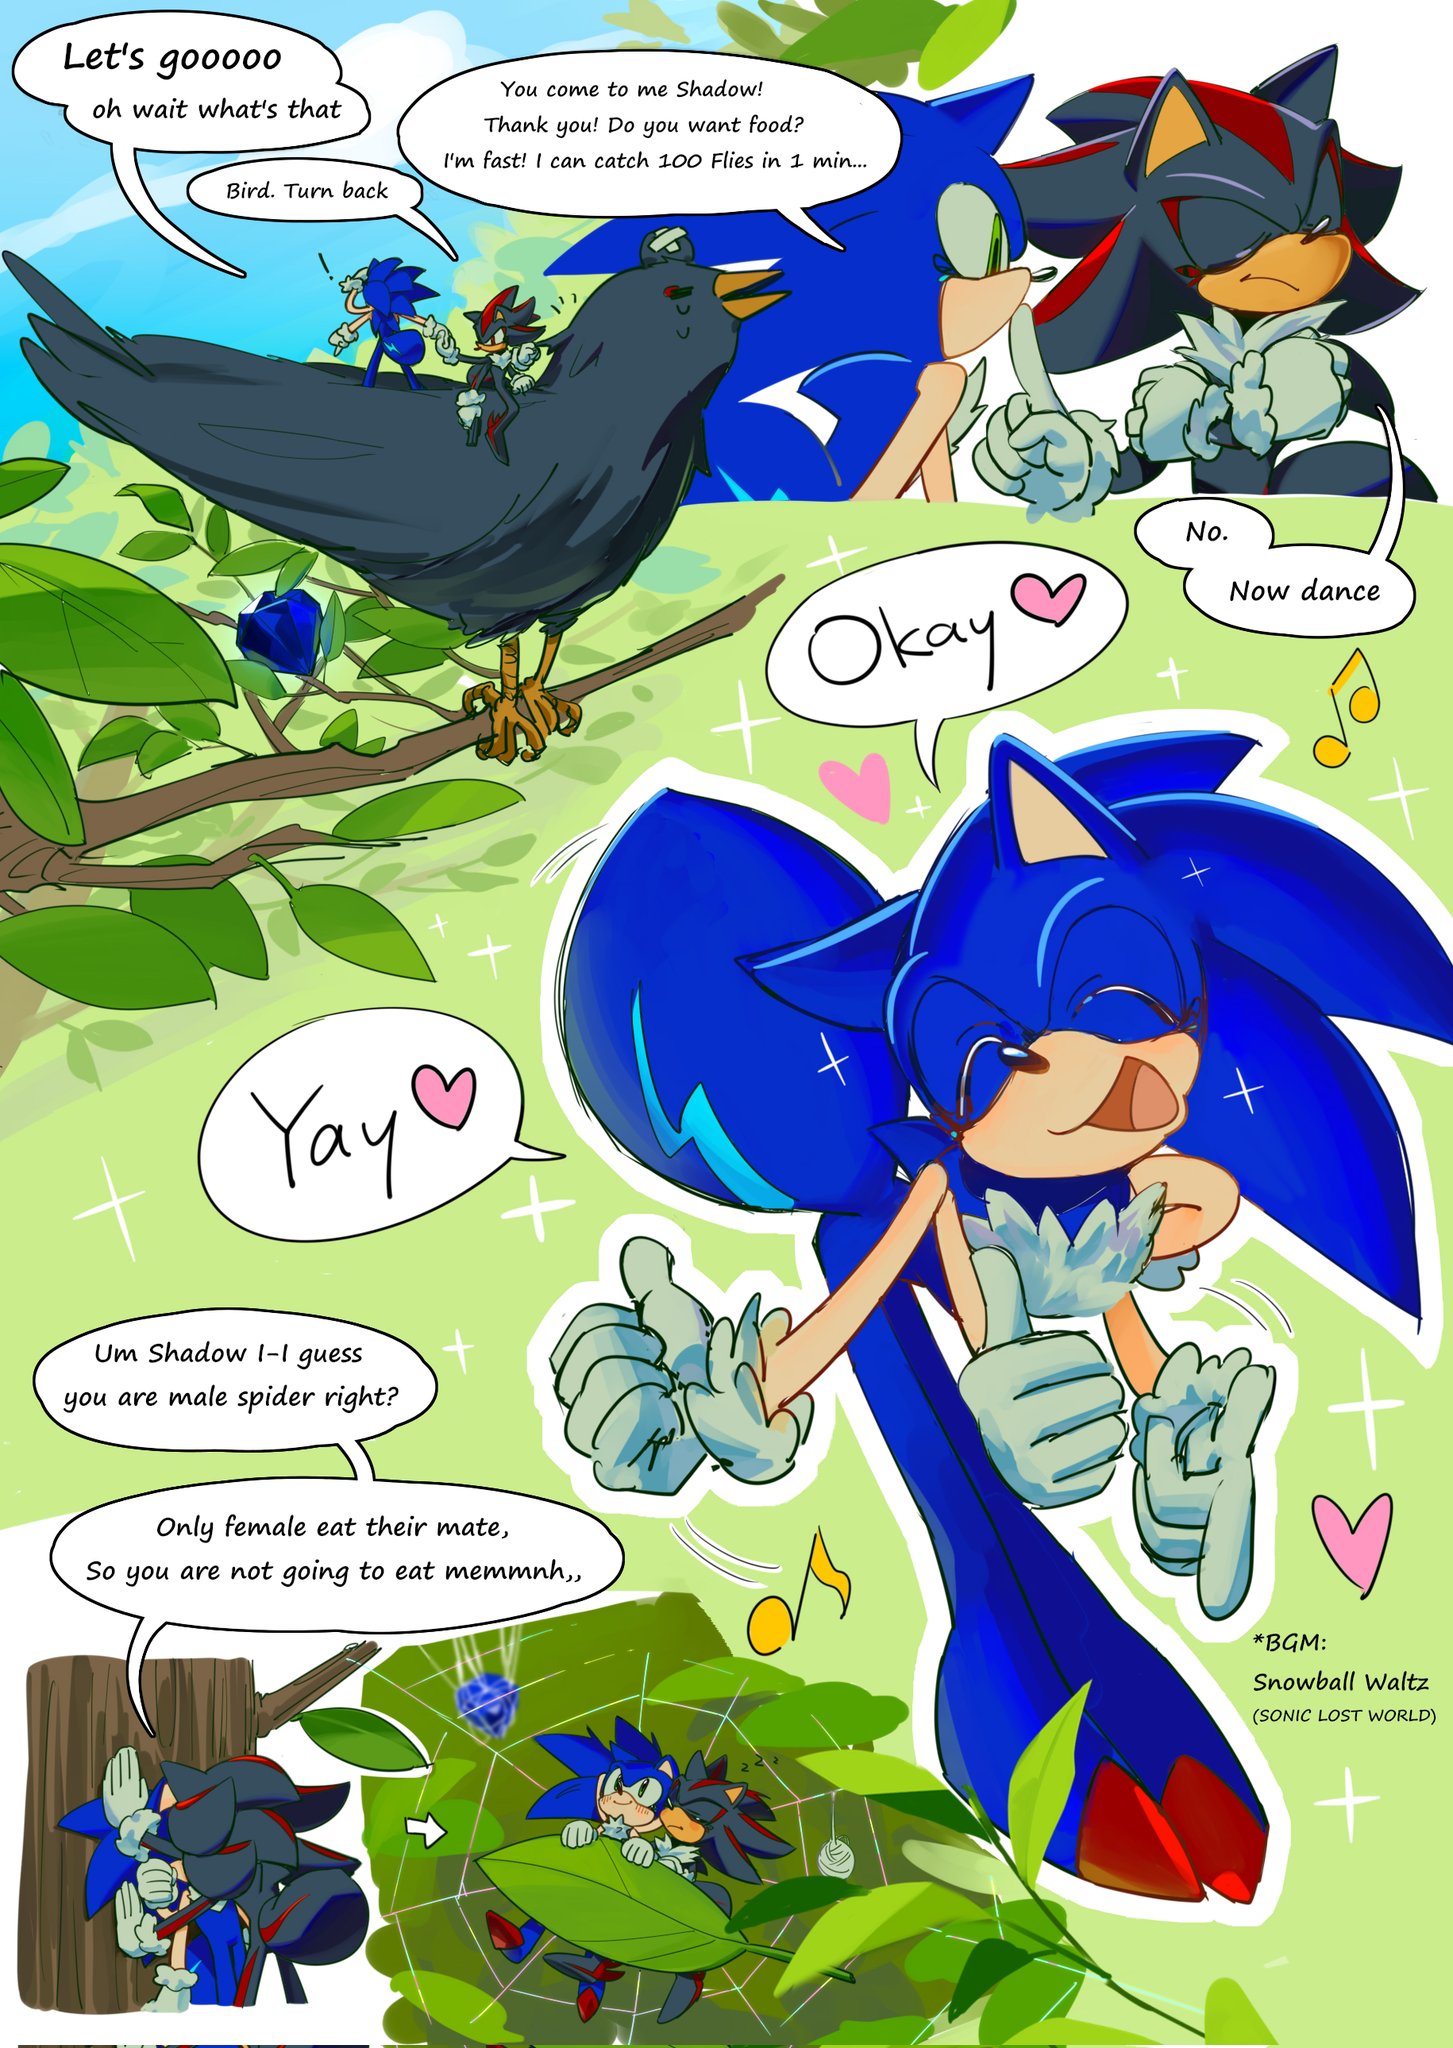 Sonadow When we meet each other again (FINISHED) - Pregnant or not